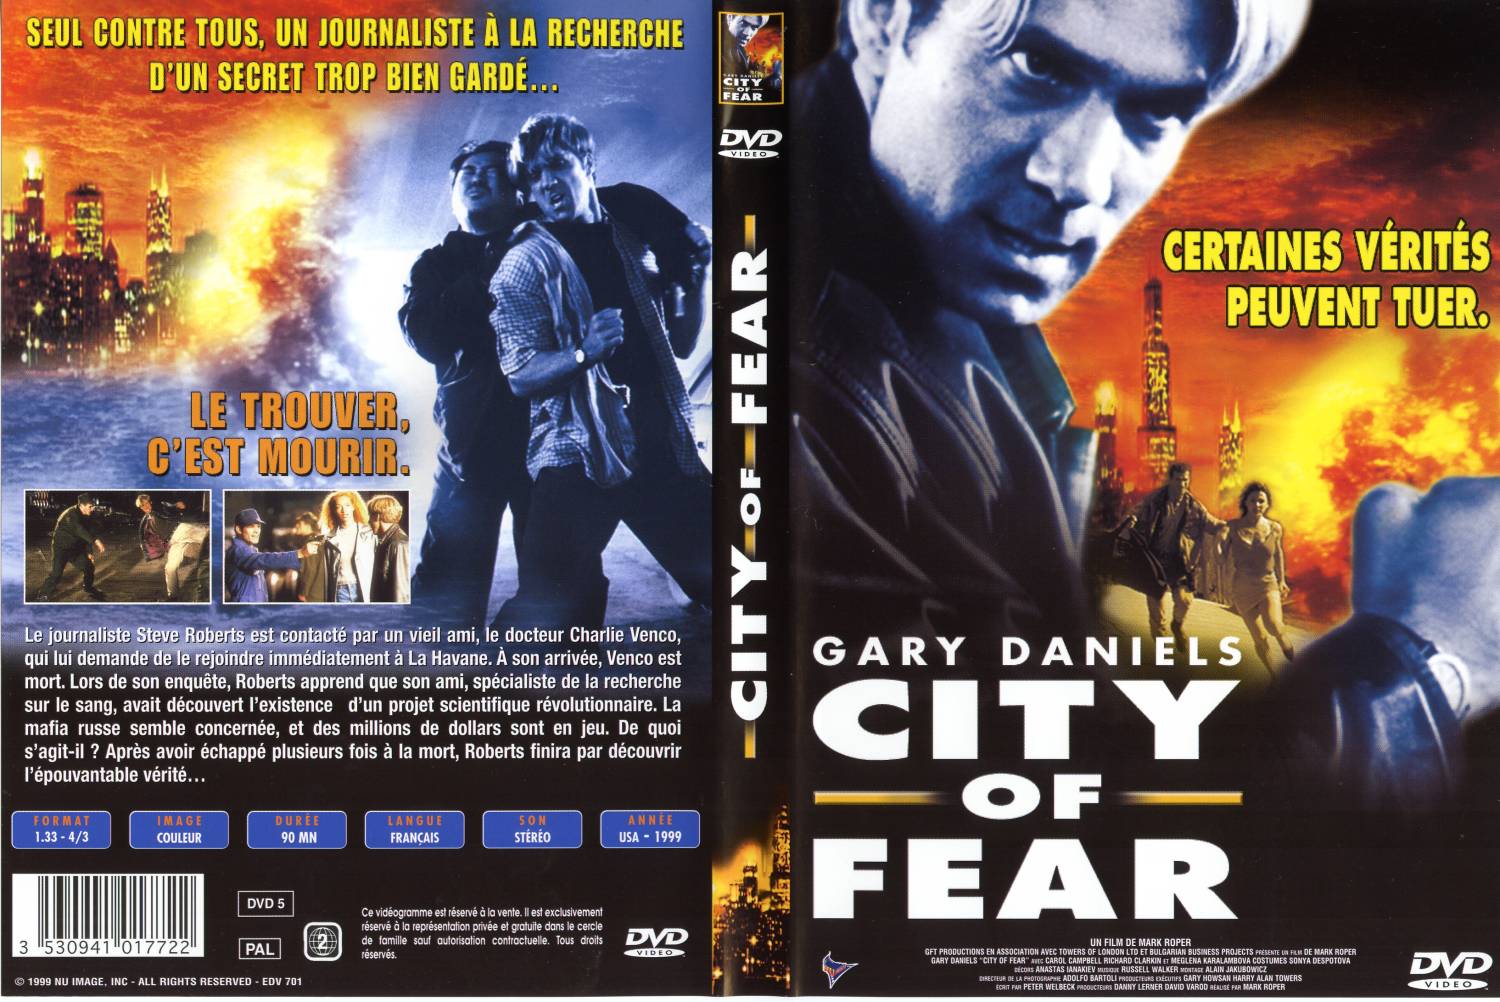 Jaquette DVD City of fear